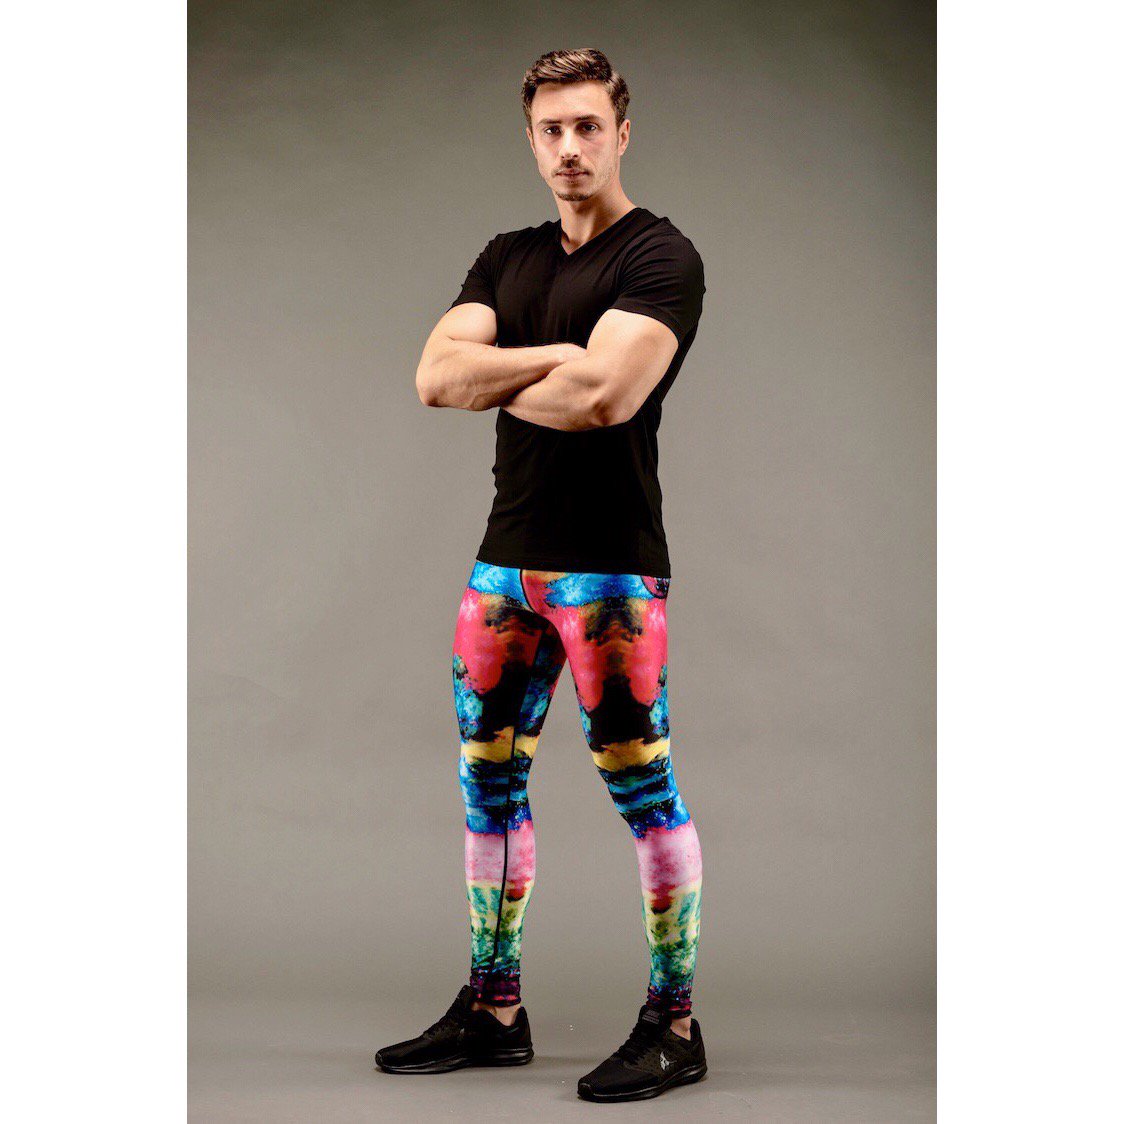 Monday can’t even cramp our style when we wear meggings. How do you conquer your first 24hrs of the work week? #meggings #meggingsmovement #mensfitness #fashiontrends #fitnessoutfit #gymwear #partyoutfit #photography #instagood #mensleggings #mensfashion #mensoutfit #styleinspo